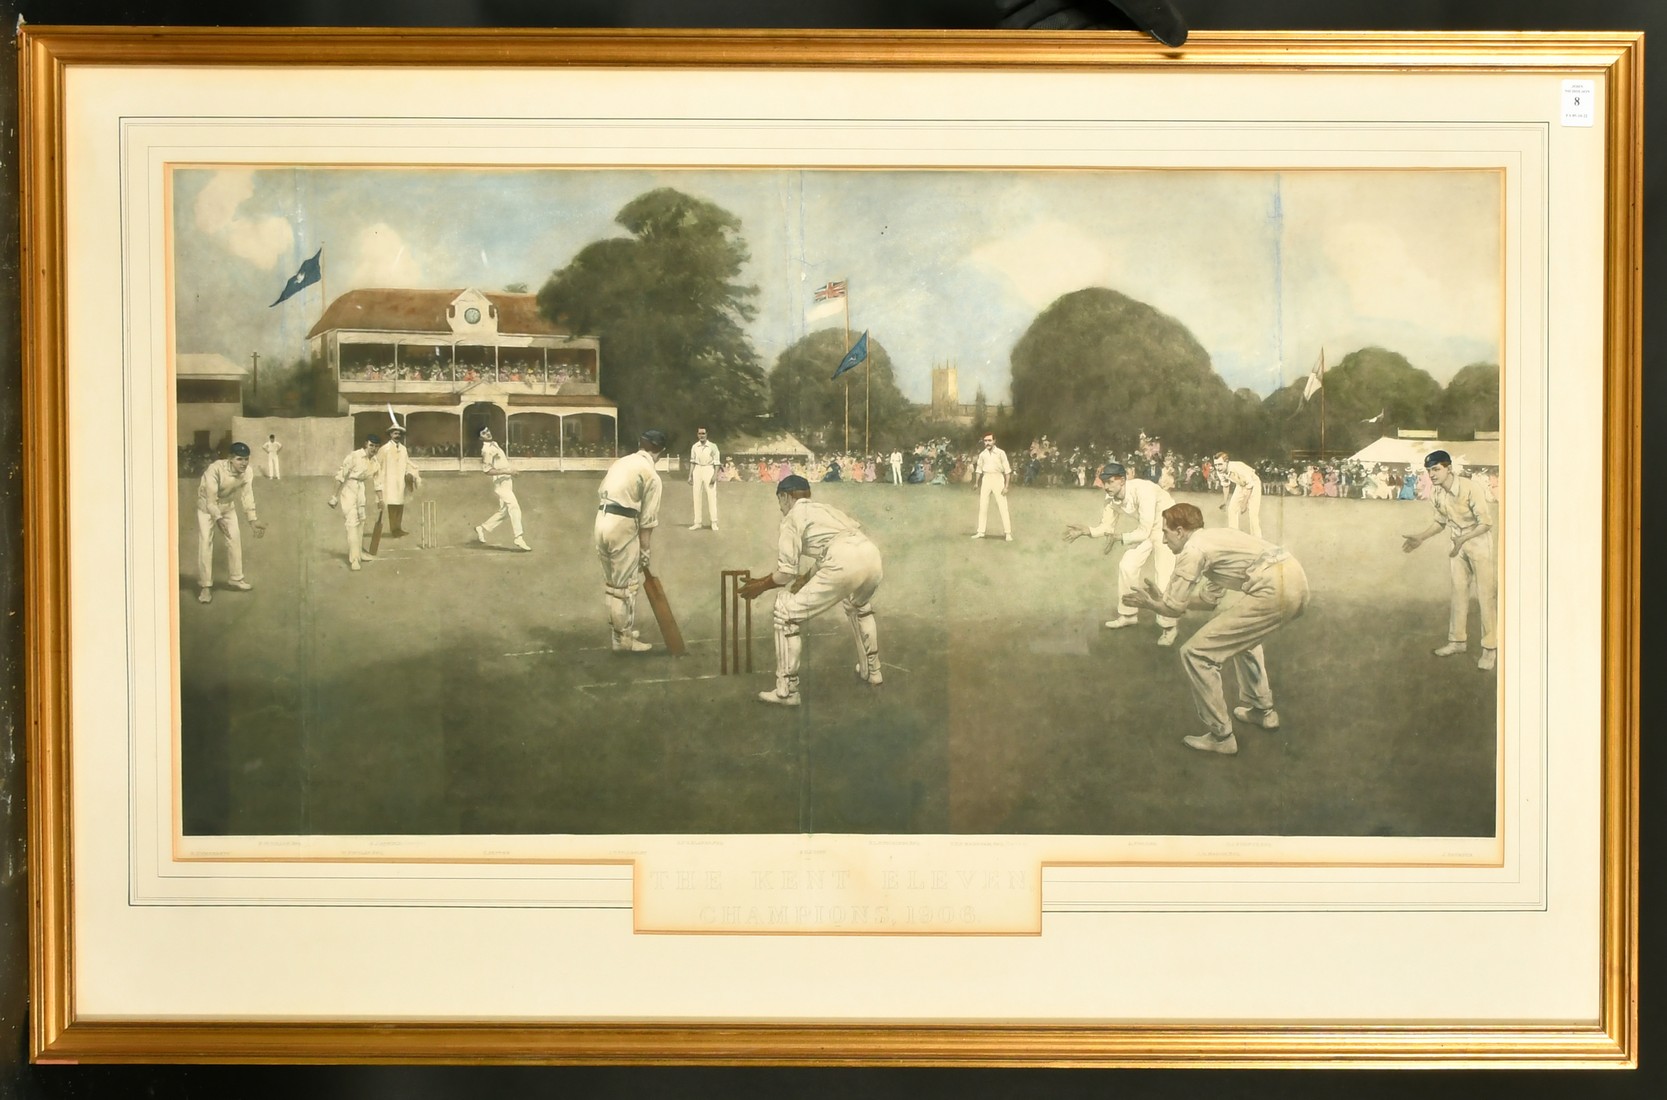 J. Seymour after E. Humphreys, 'The Kent Eleven, Champions 1906', swan electric hand coloured - Image 2 of 3